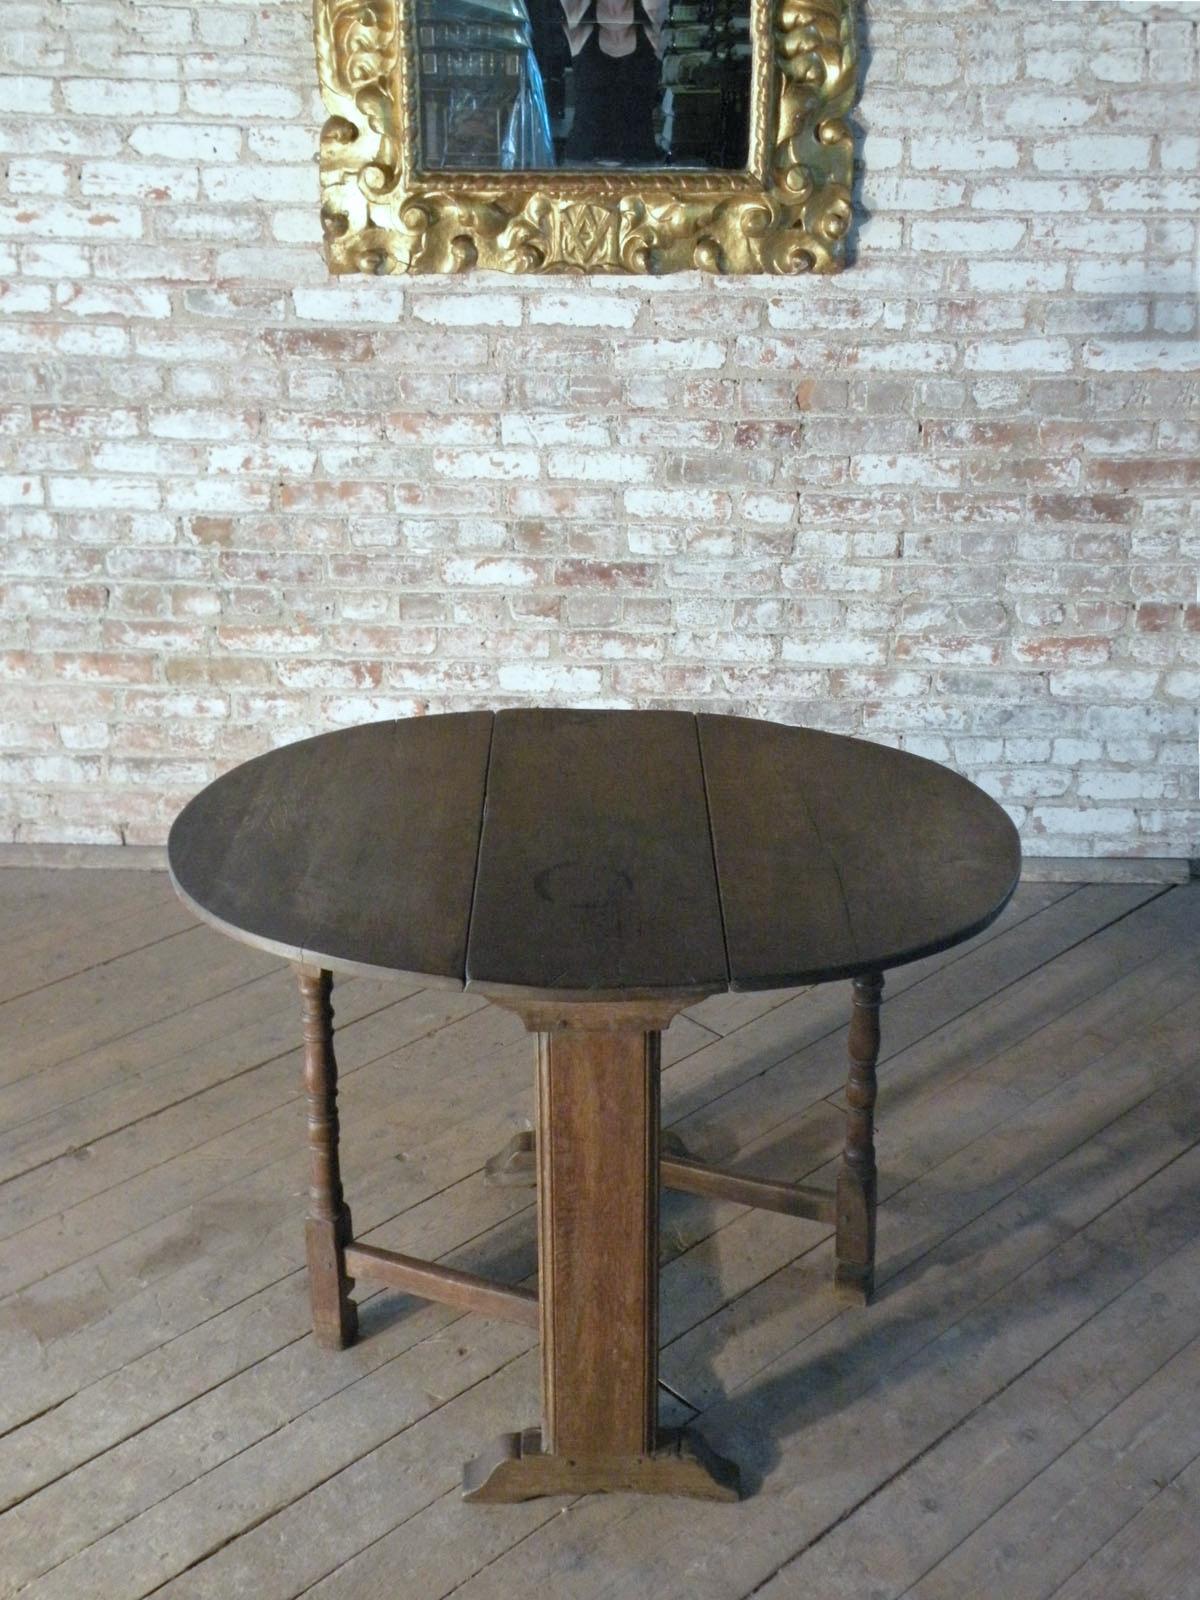 Well proportioned and versatile English Oak Dropleaf / Gateleg Table of oval form. Suited for various functions, it can be used as small wall-console, narrow end table or, with both leaves open, as end or center table. The top is supported by